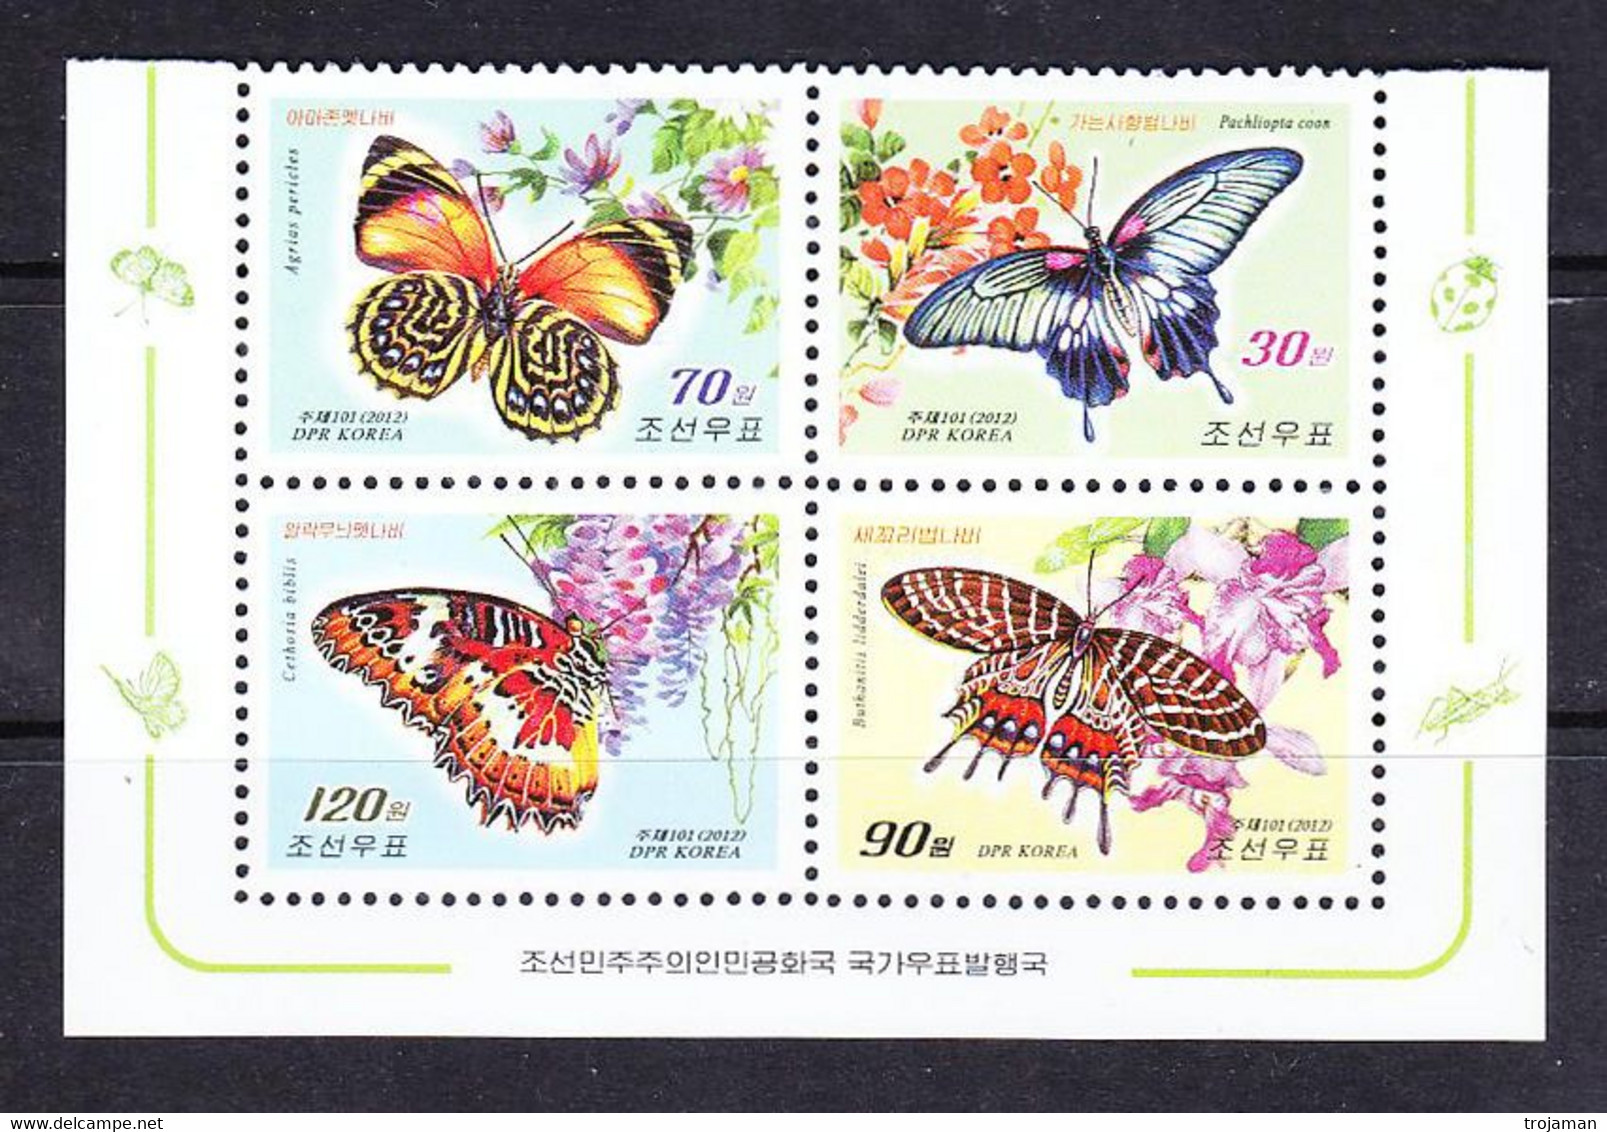 EX-PR-21-08 NORTH KOREA. BUTTERFLYES. 2012. MICHEL 5851-54 . MNH**. STARTING PRICE APPROXIMATELY FACE VALUE. - Vlinders